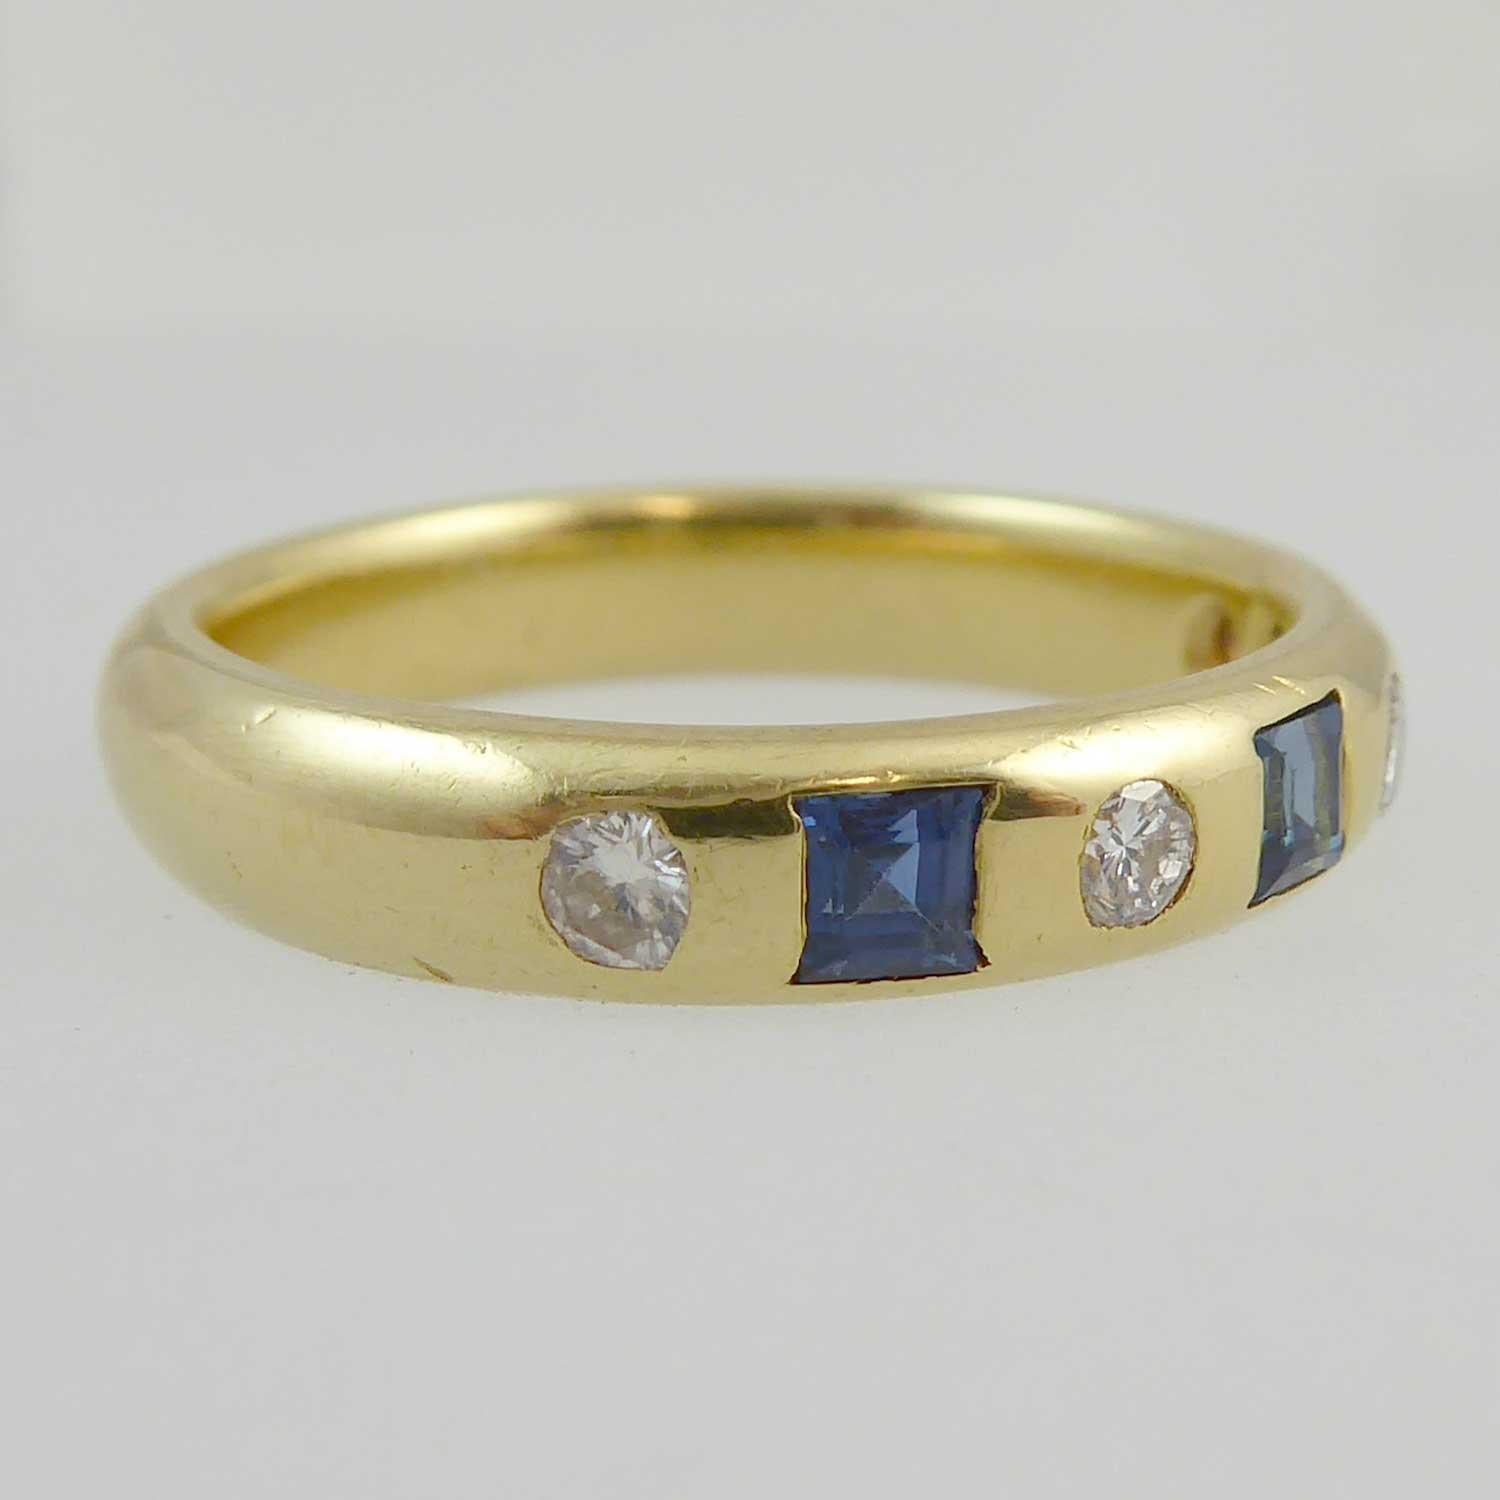 A pre-owned sapphire and diamond set dress ring featuring three trap cut sapphires alternating with four round brilliant cut diamonds in a channel setting across the finger.  The sapphires measure an approxiimate average of 2.5mm square and have a